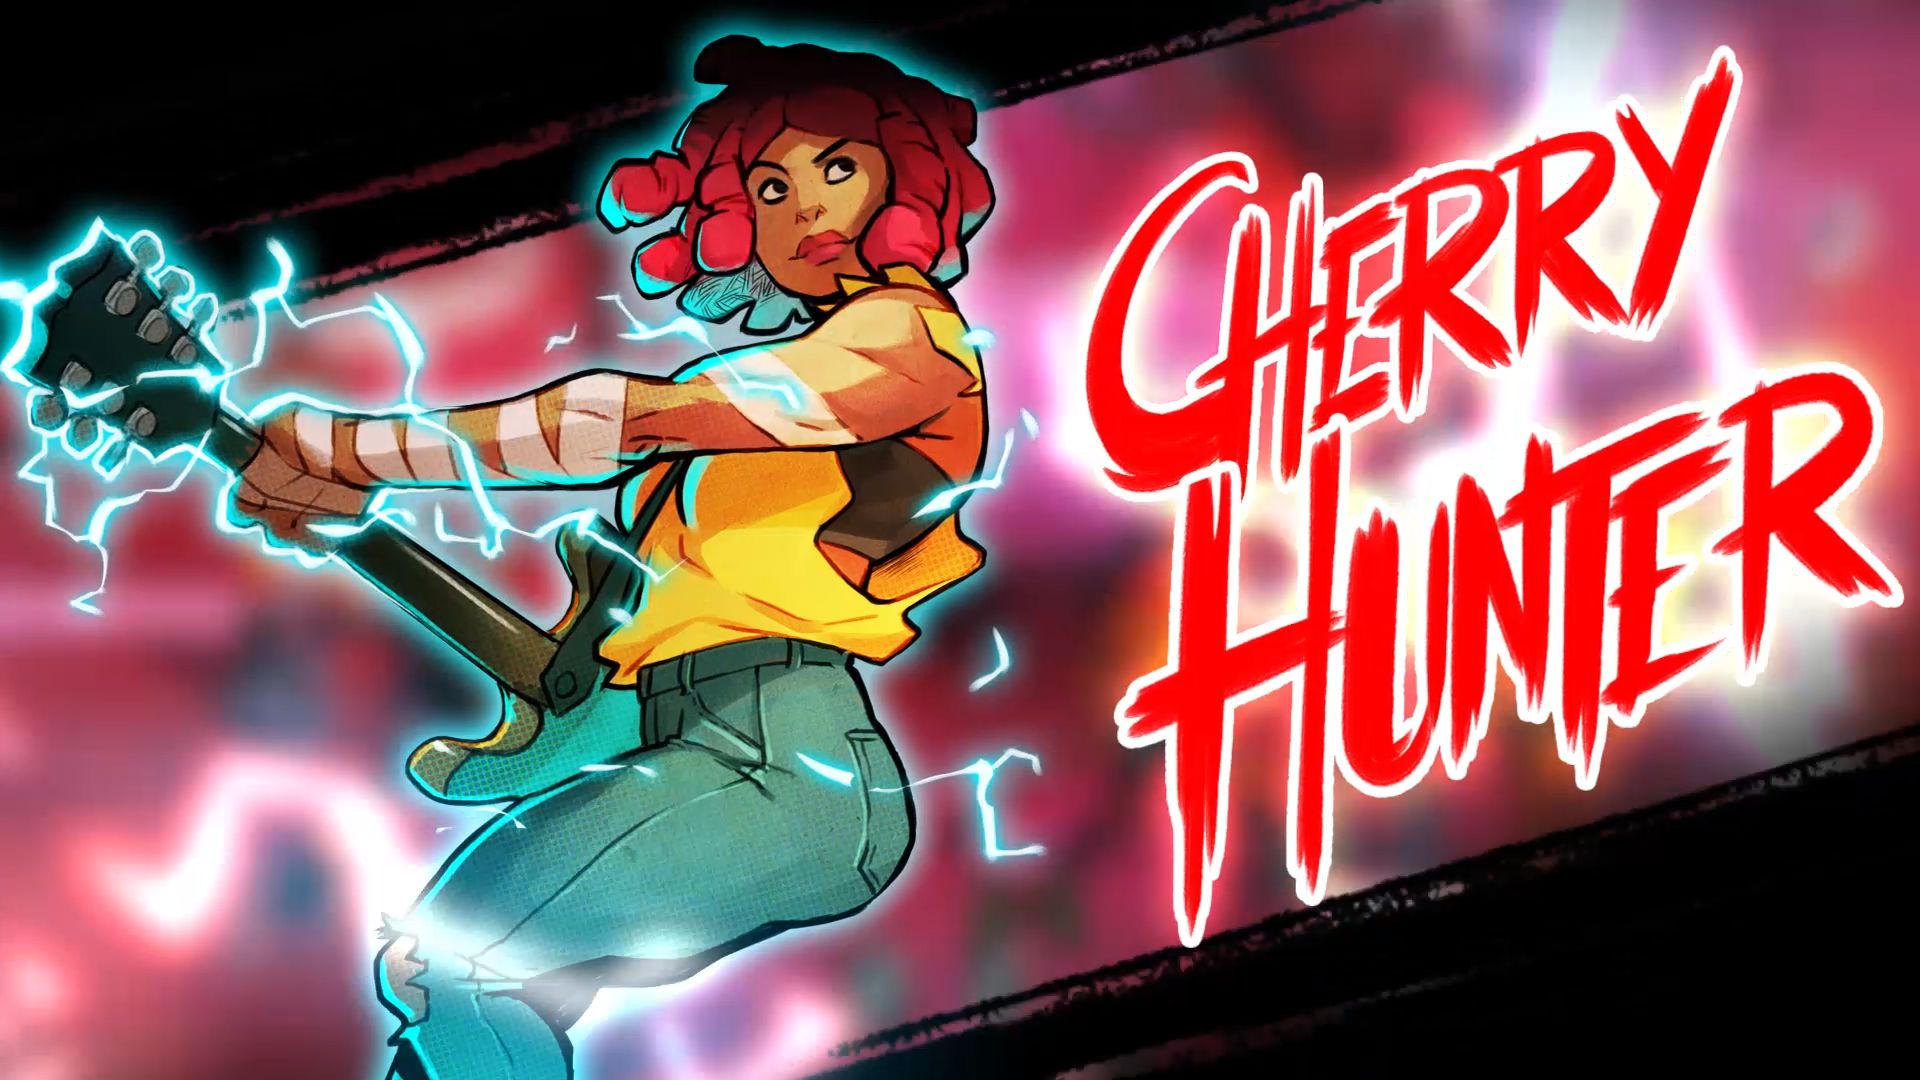 A New Character For Streets Of Rage 4 Has Been Revealed At Gamescom, Fourth New Character To The Lineup